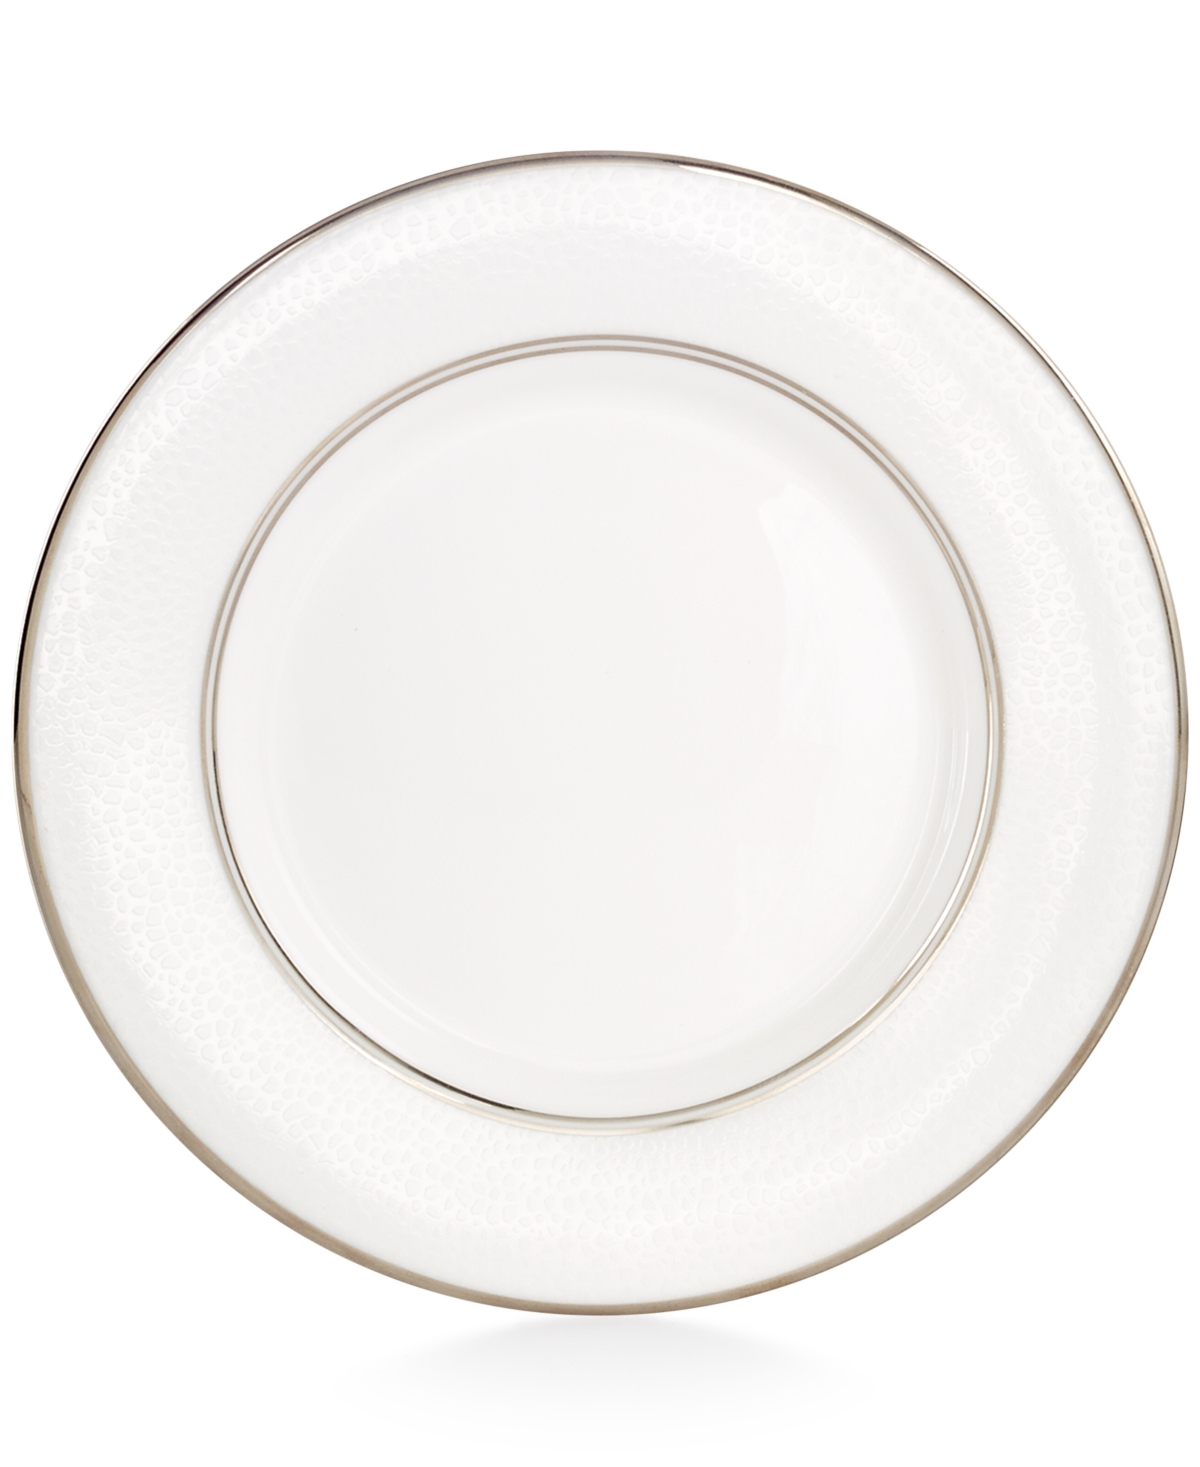 Kate Spade New York Cypress Point Saucer In No Color